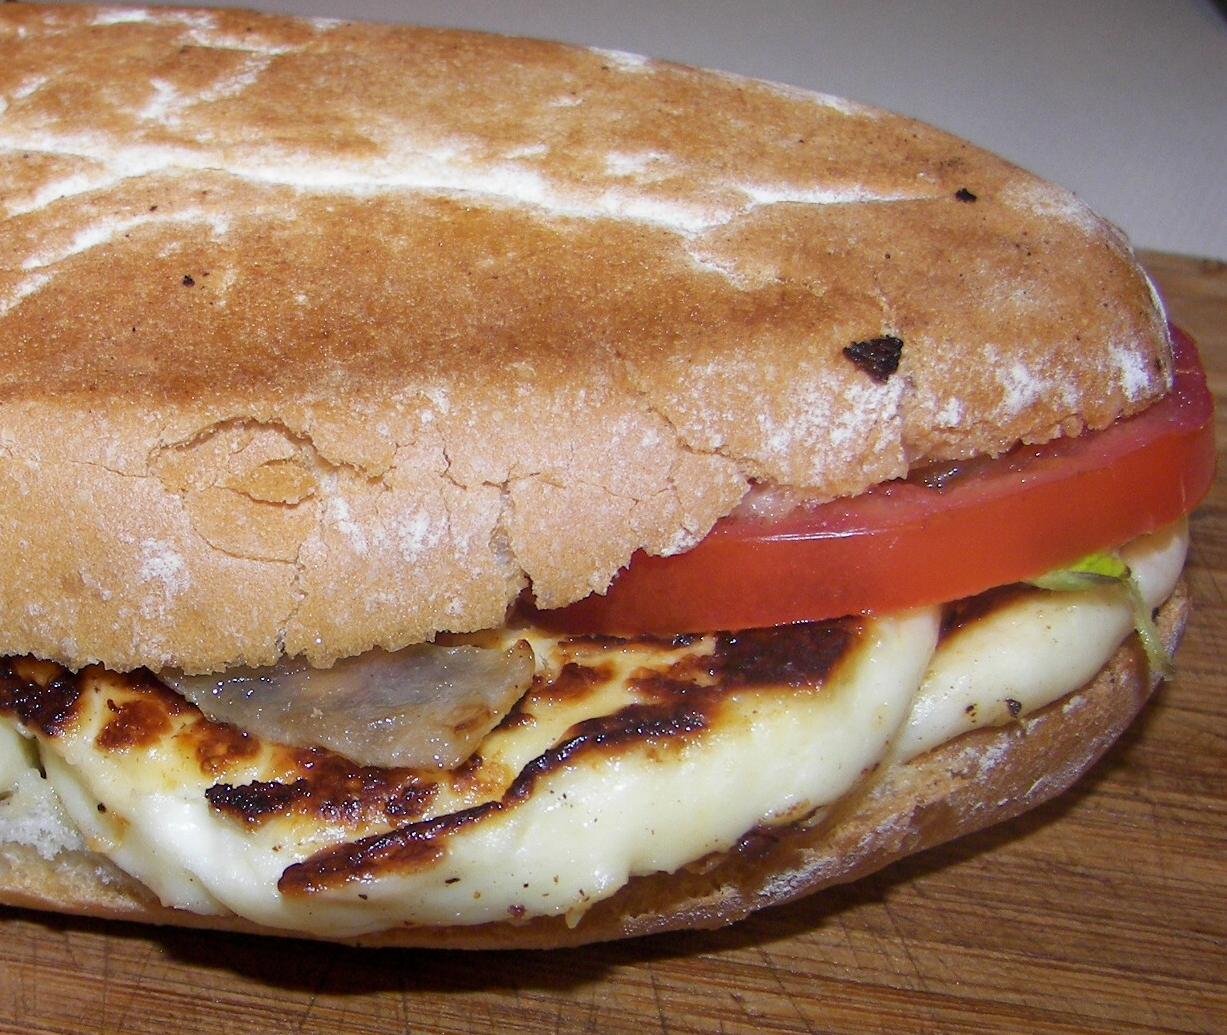  Our halloumi, onion and tomato sandwich is a true work of culinary art.